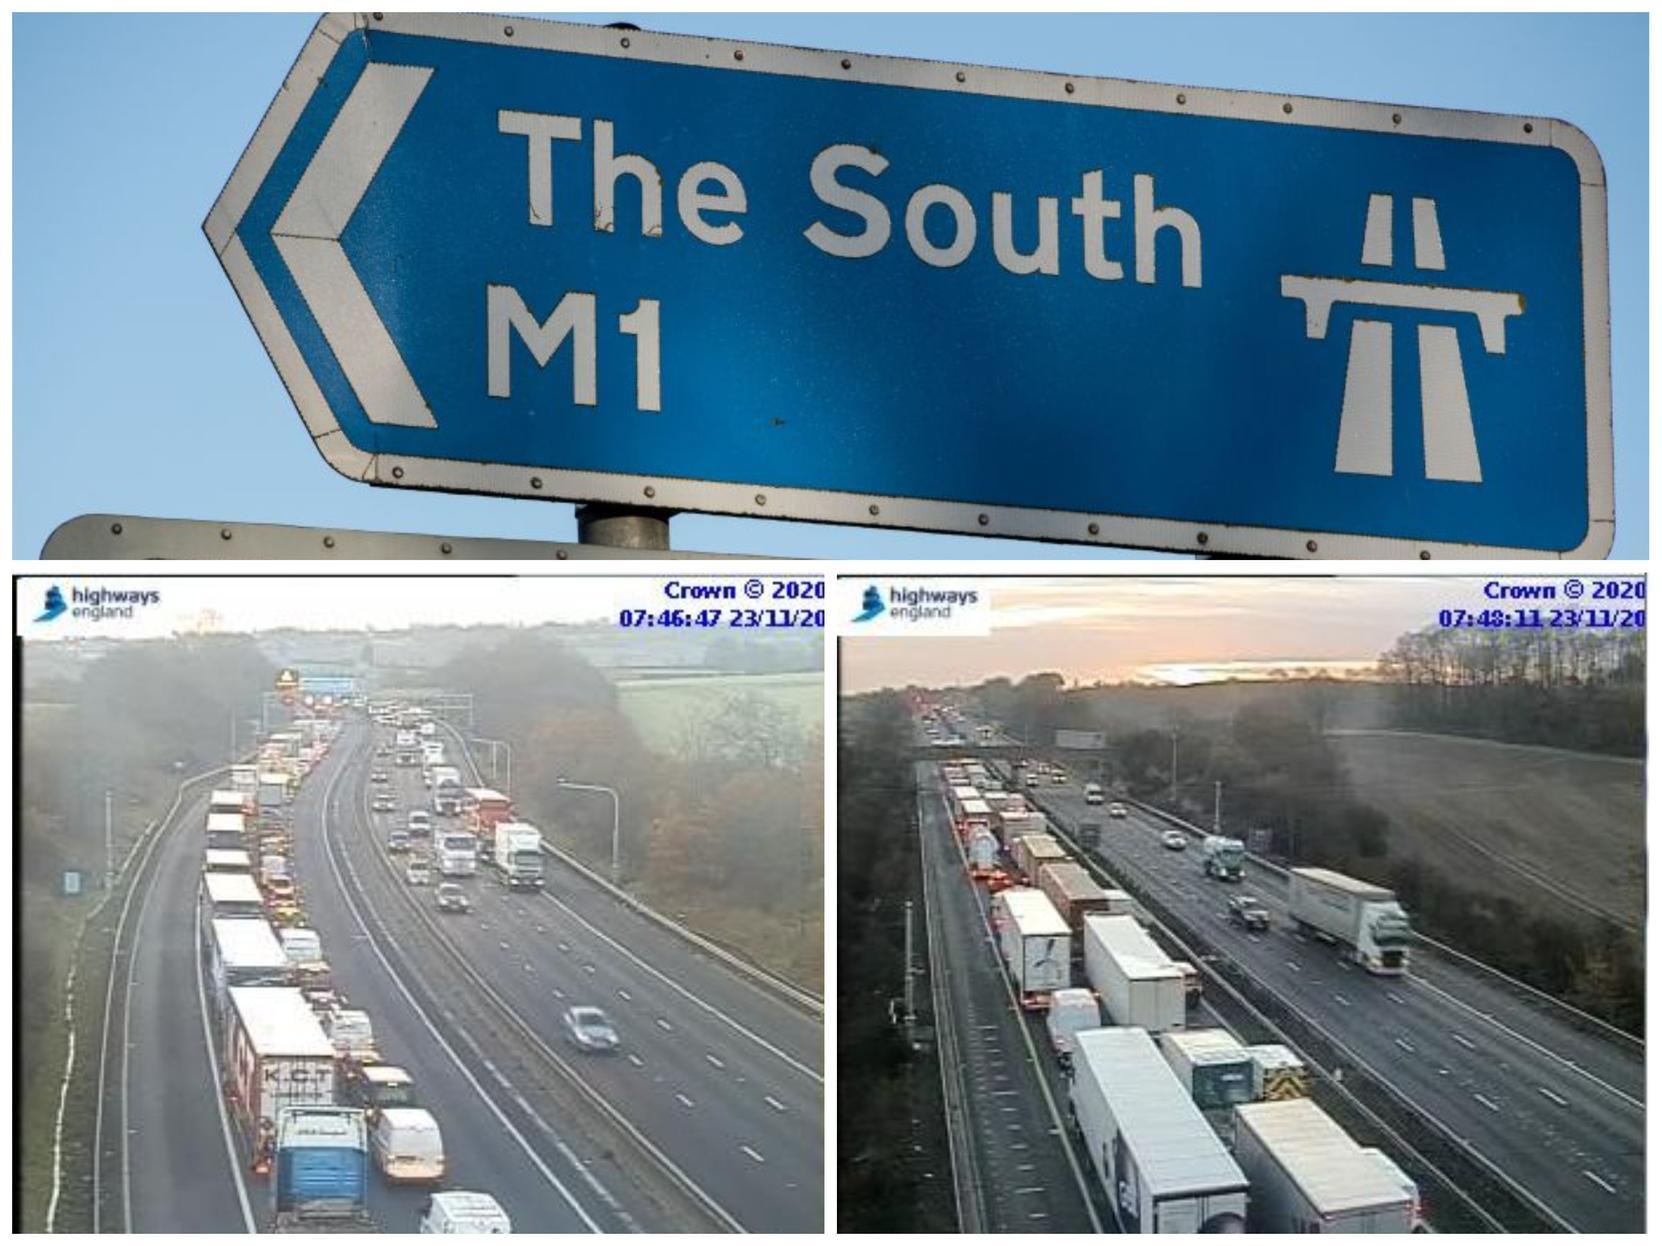 travel update on m1 southbound